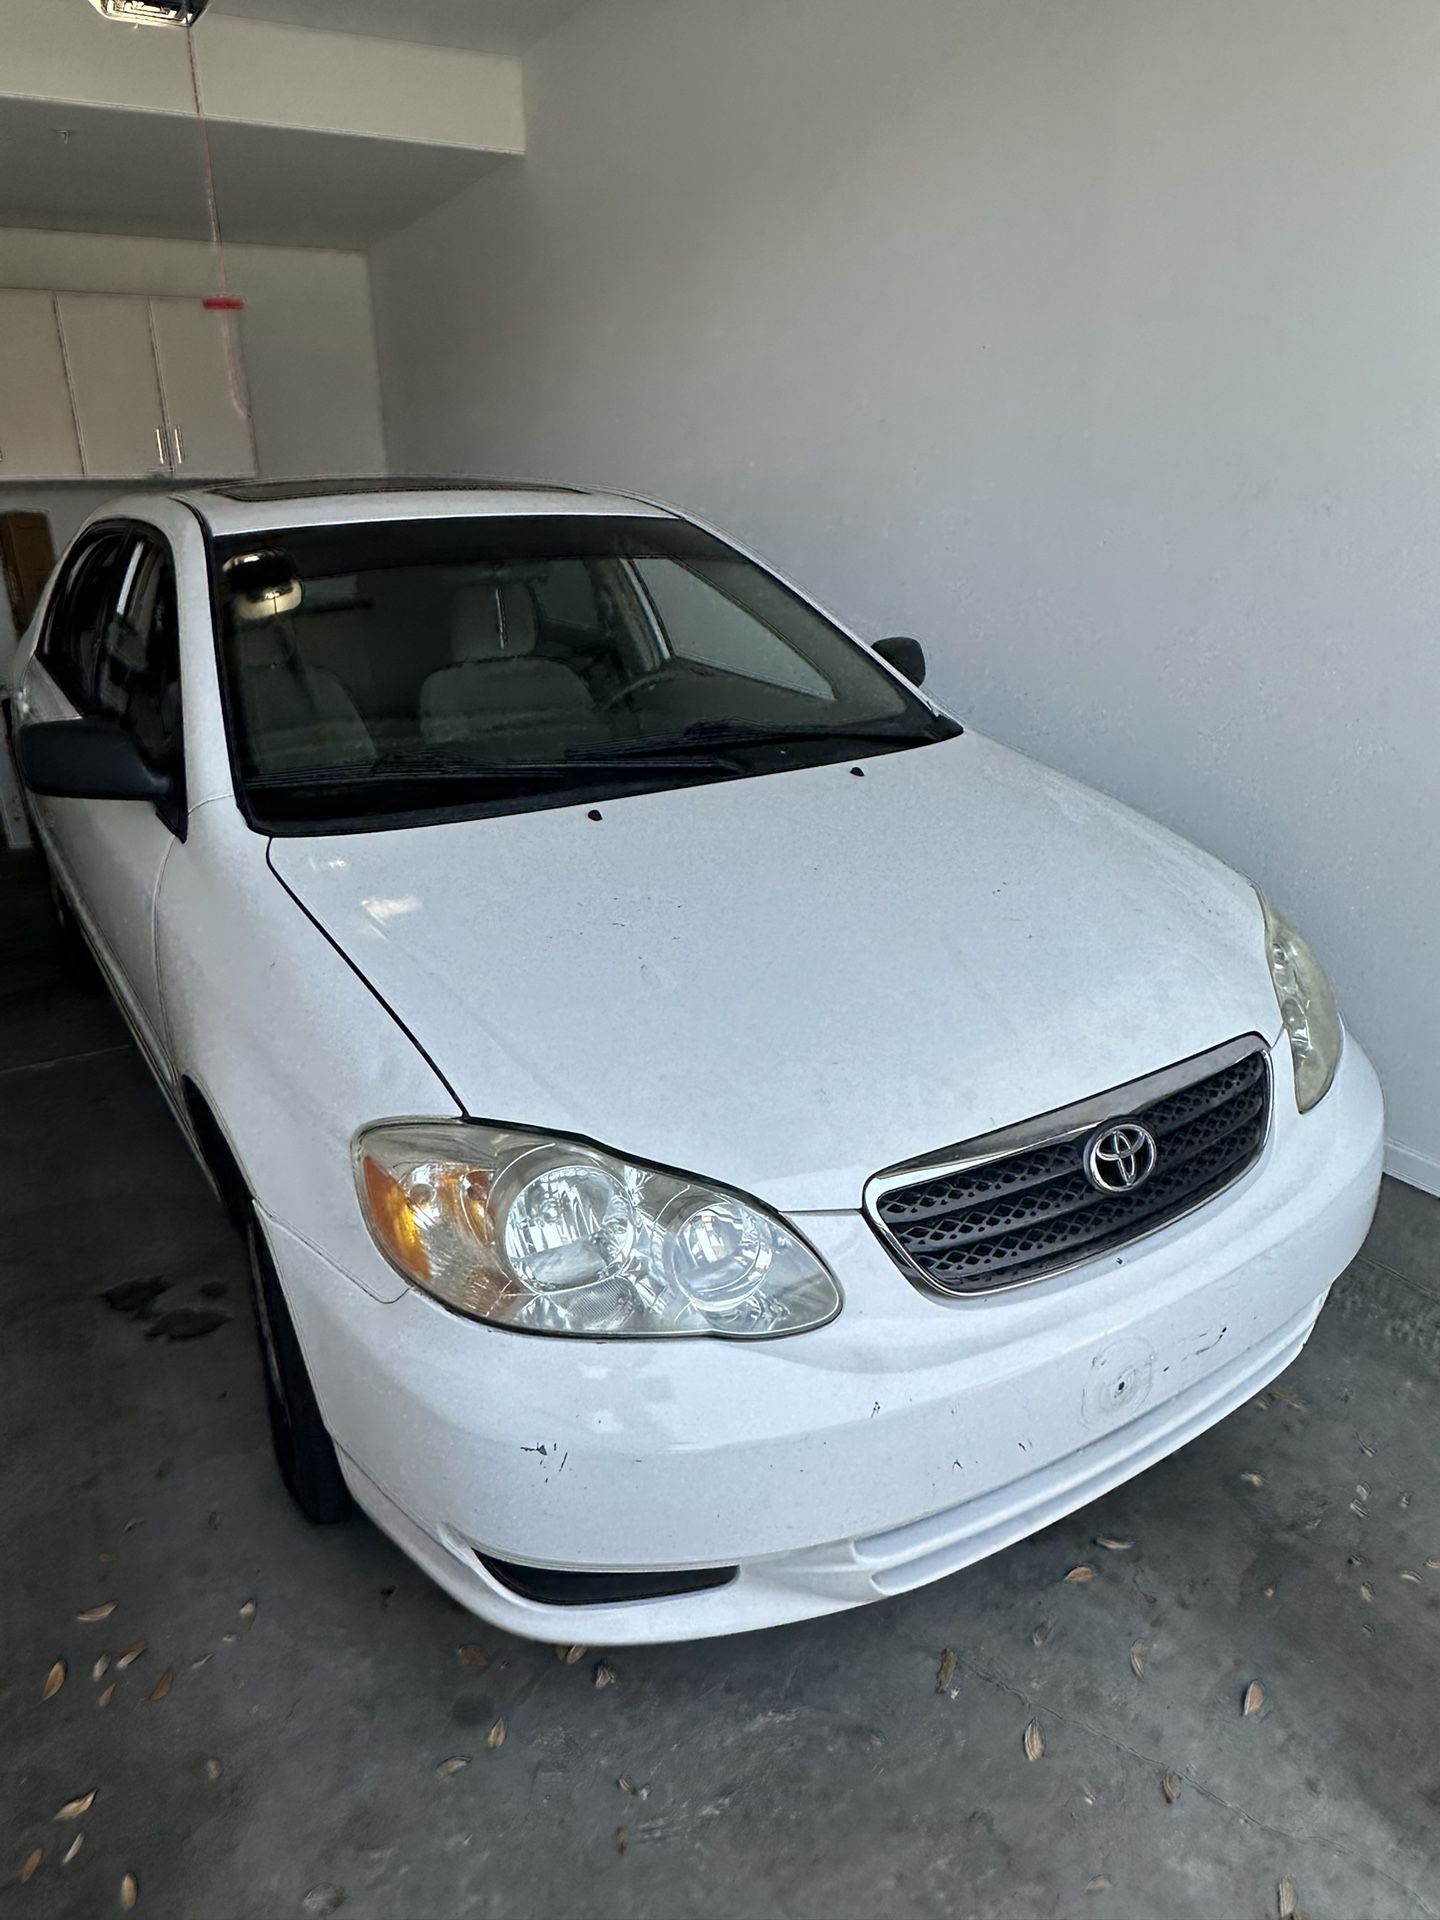 2007 Toyota Corolla (Parts Only)